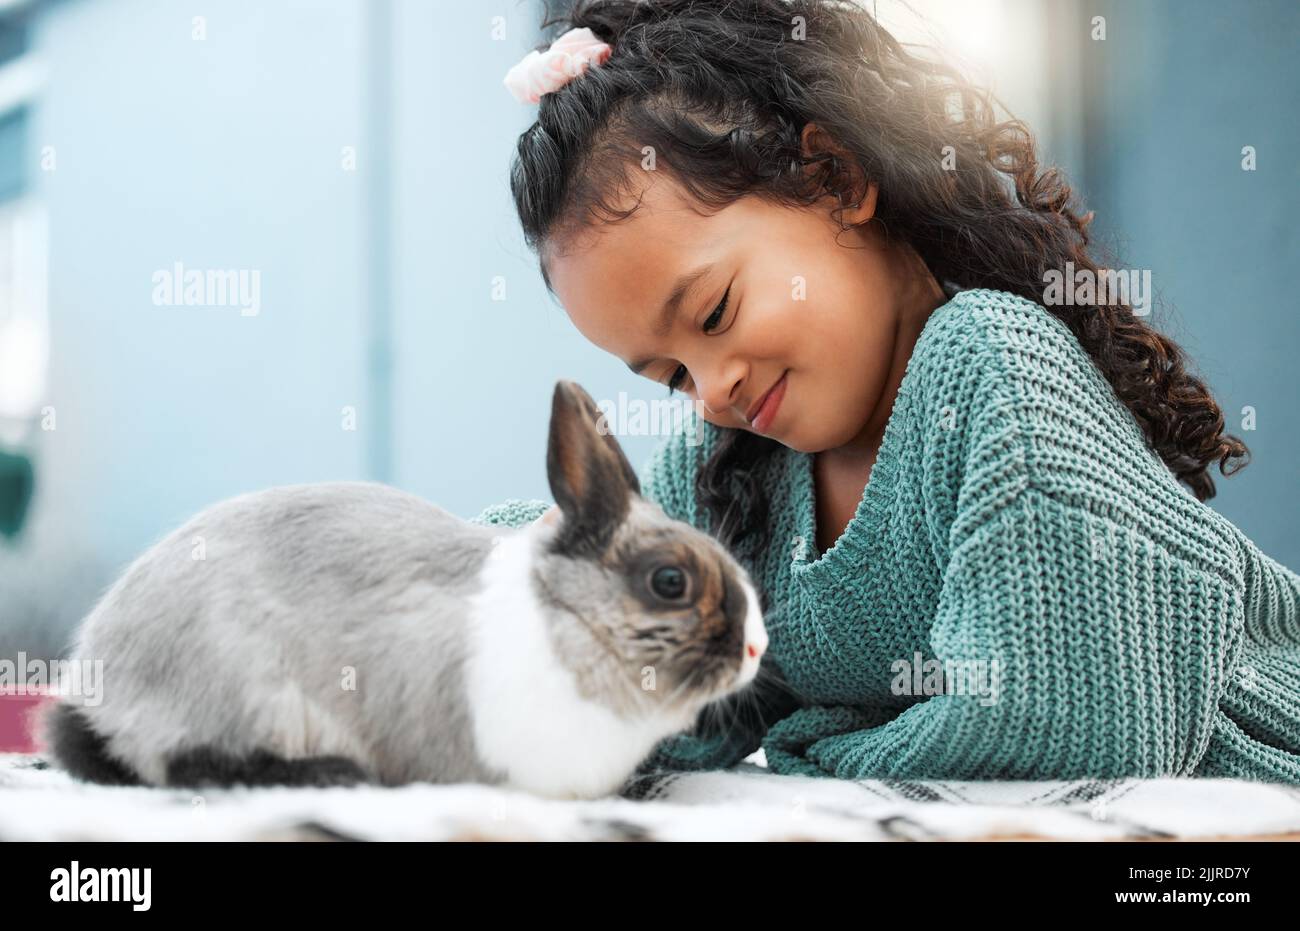 Spending time with my favourite pet. an adorable little girl bonding with her pet rabbit at home. Stock Photo